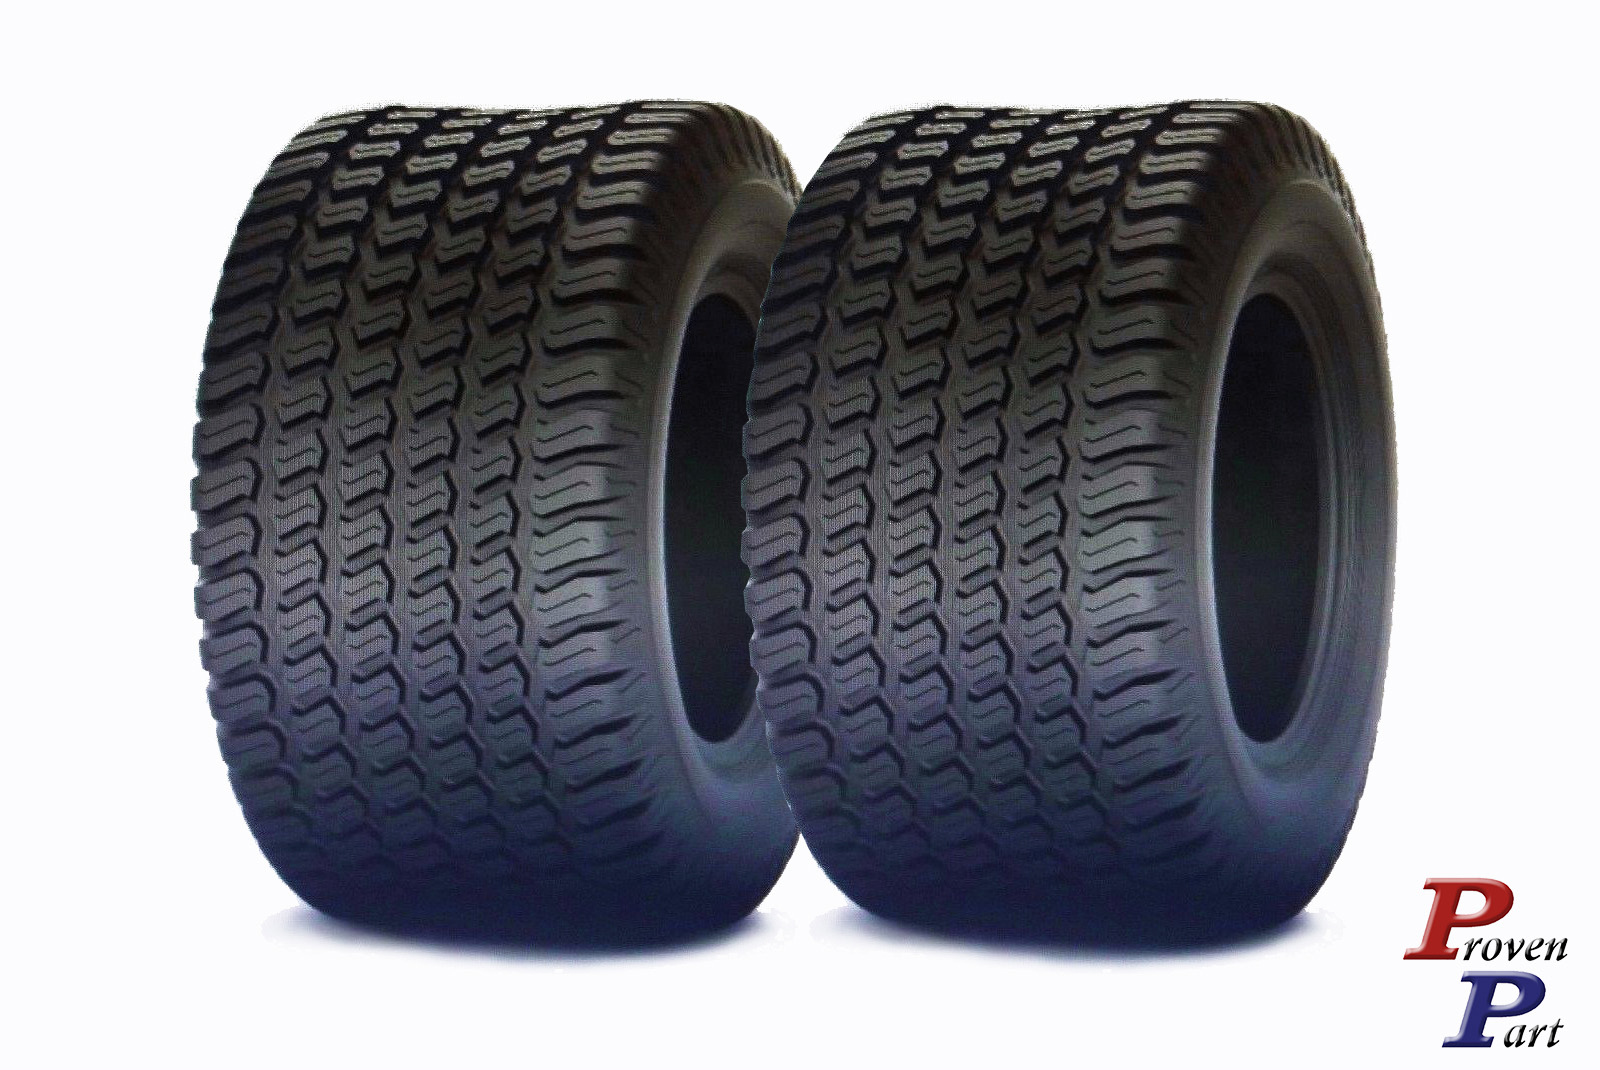 Set of 2 riding mower tractor Promaster tires 4 Ply 18X8.50-10